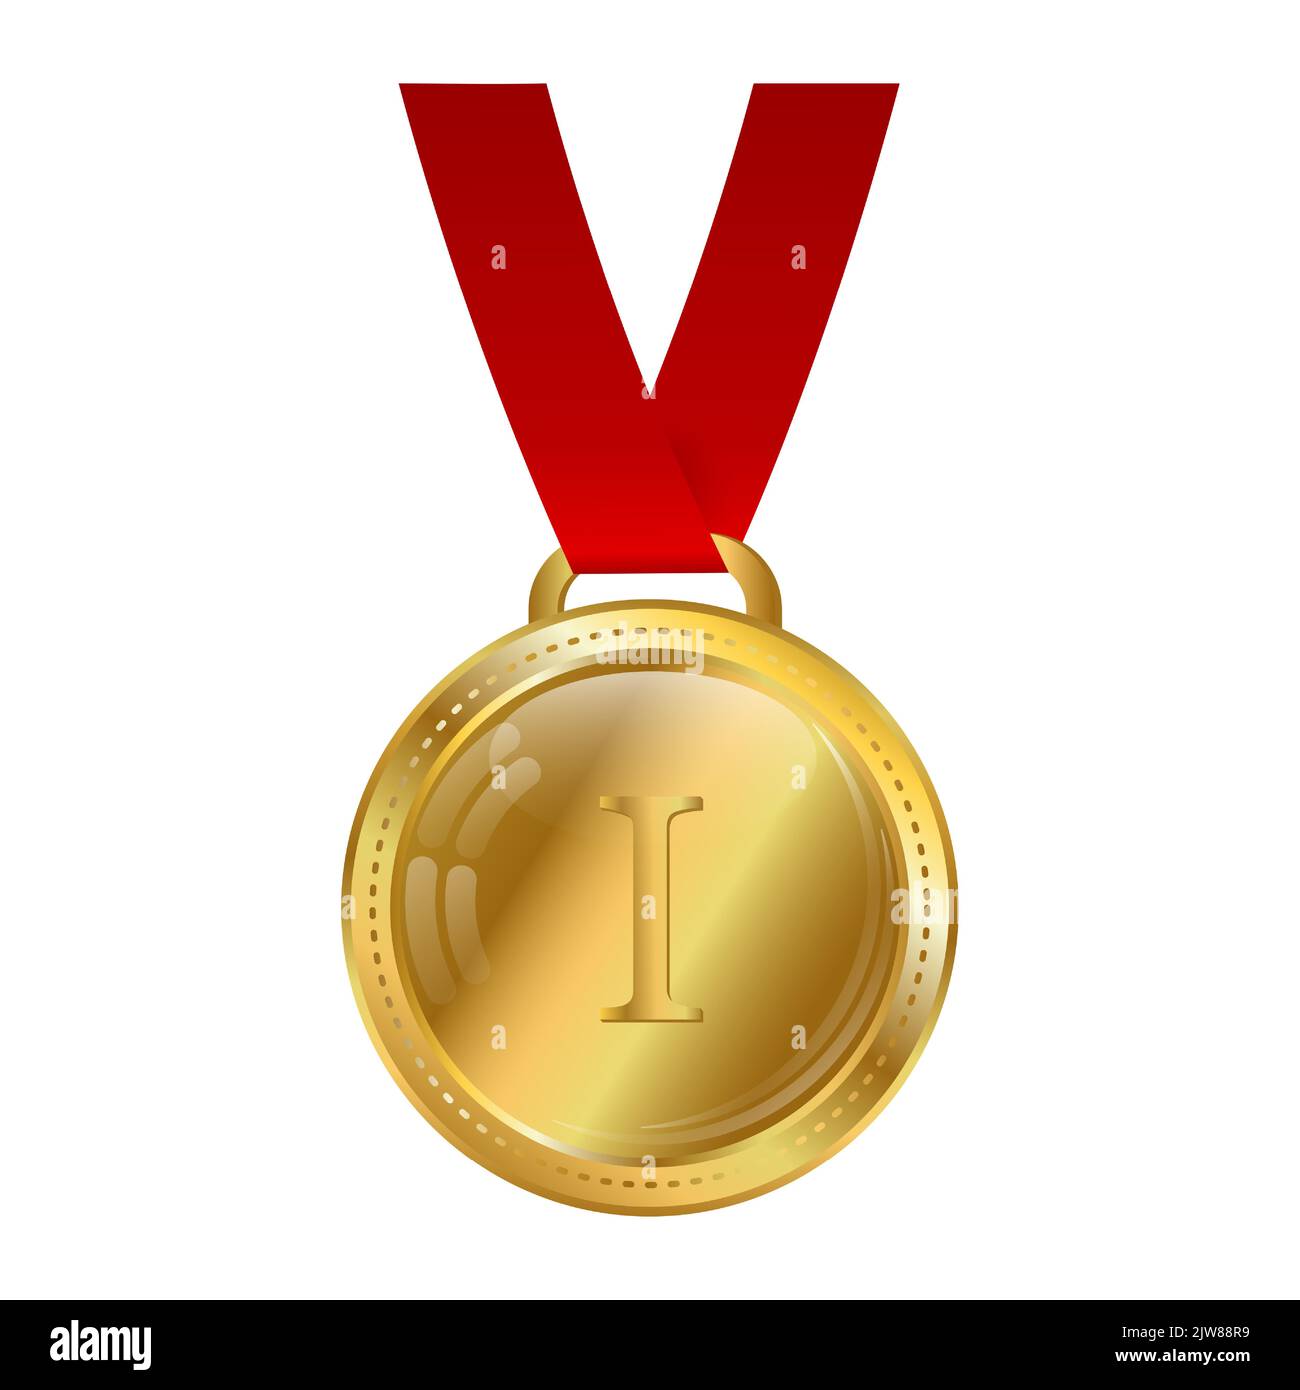 Gold medal with red ribbon isolated on white background. Award, prize for first place. Vector illustration. Stock Vector